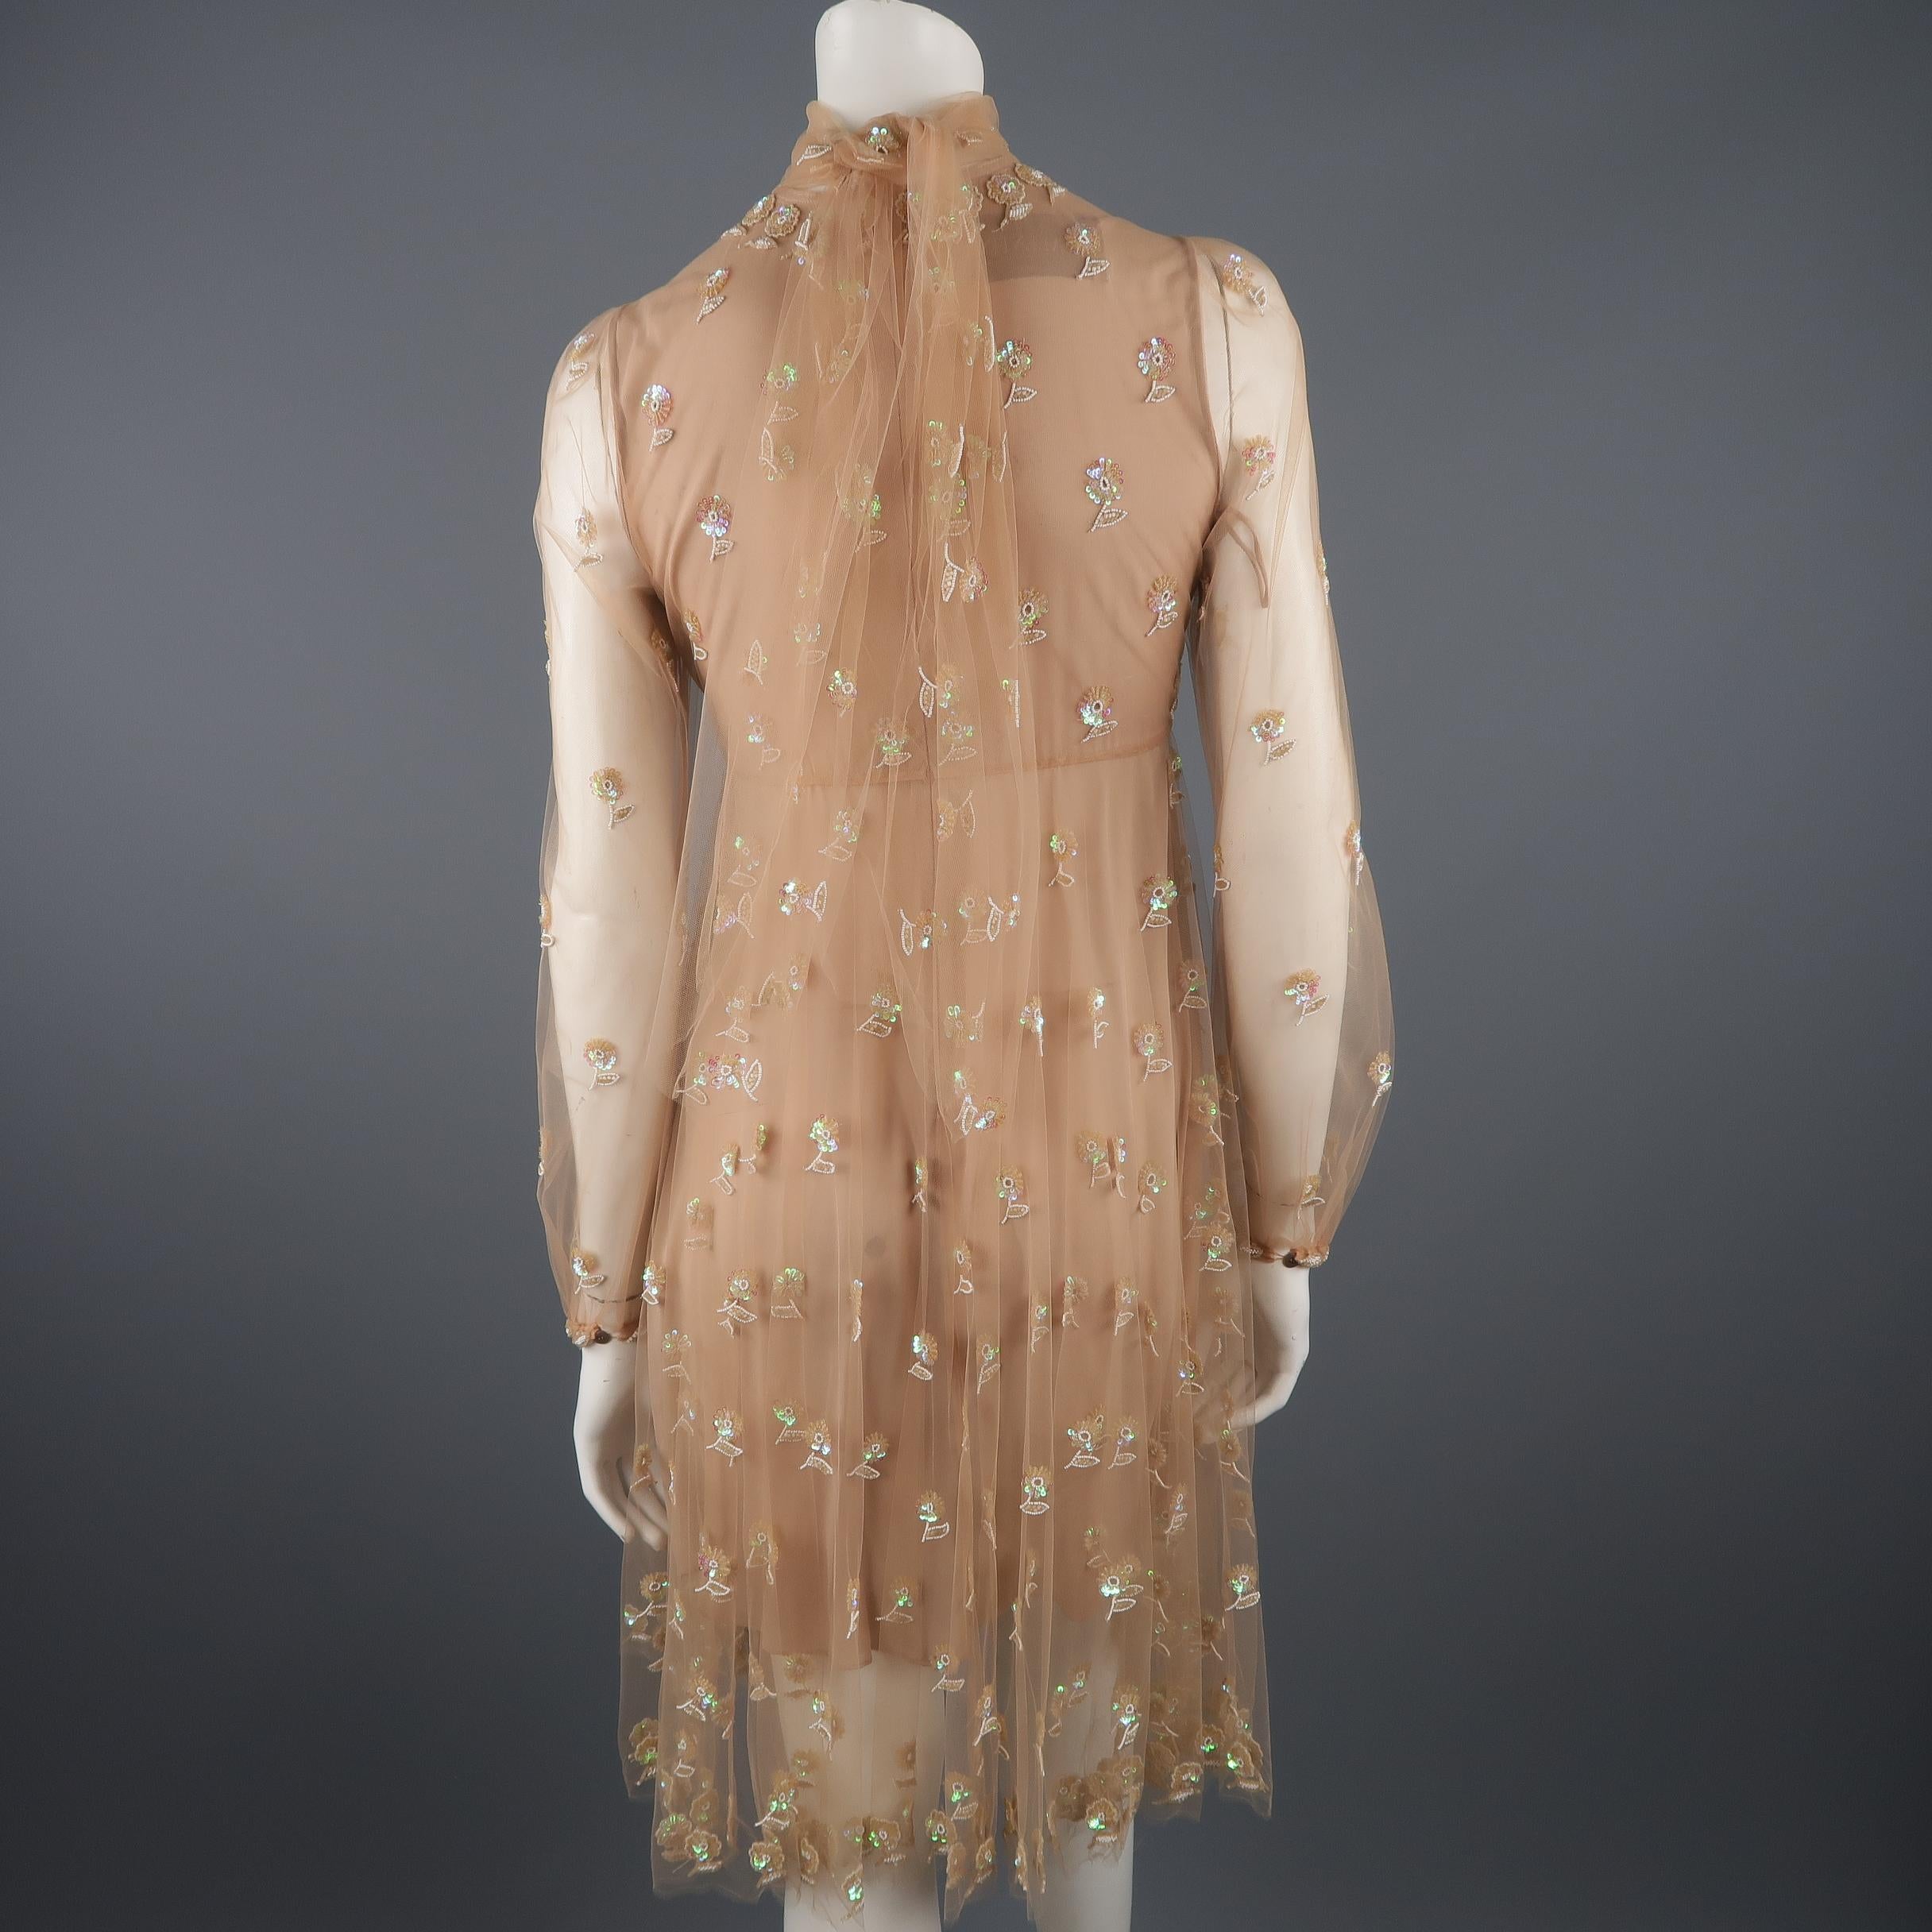 Women's Valentino Dress - Tan Floral Beaded Tulle Scarf Cocktail Dress